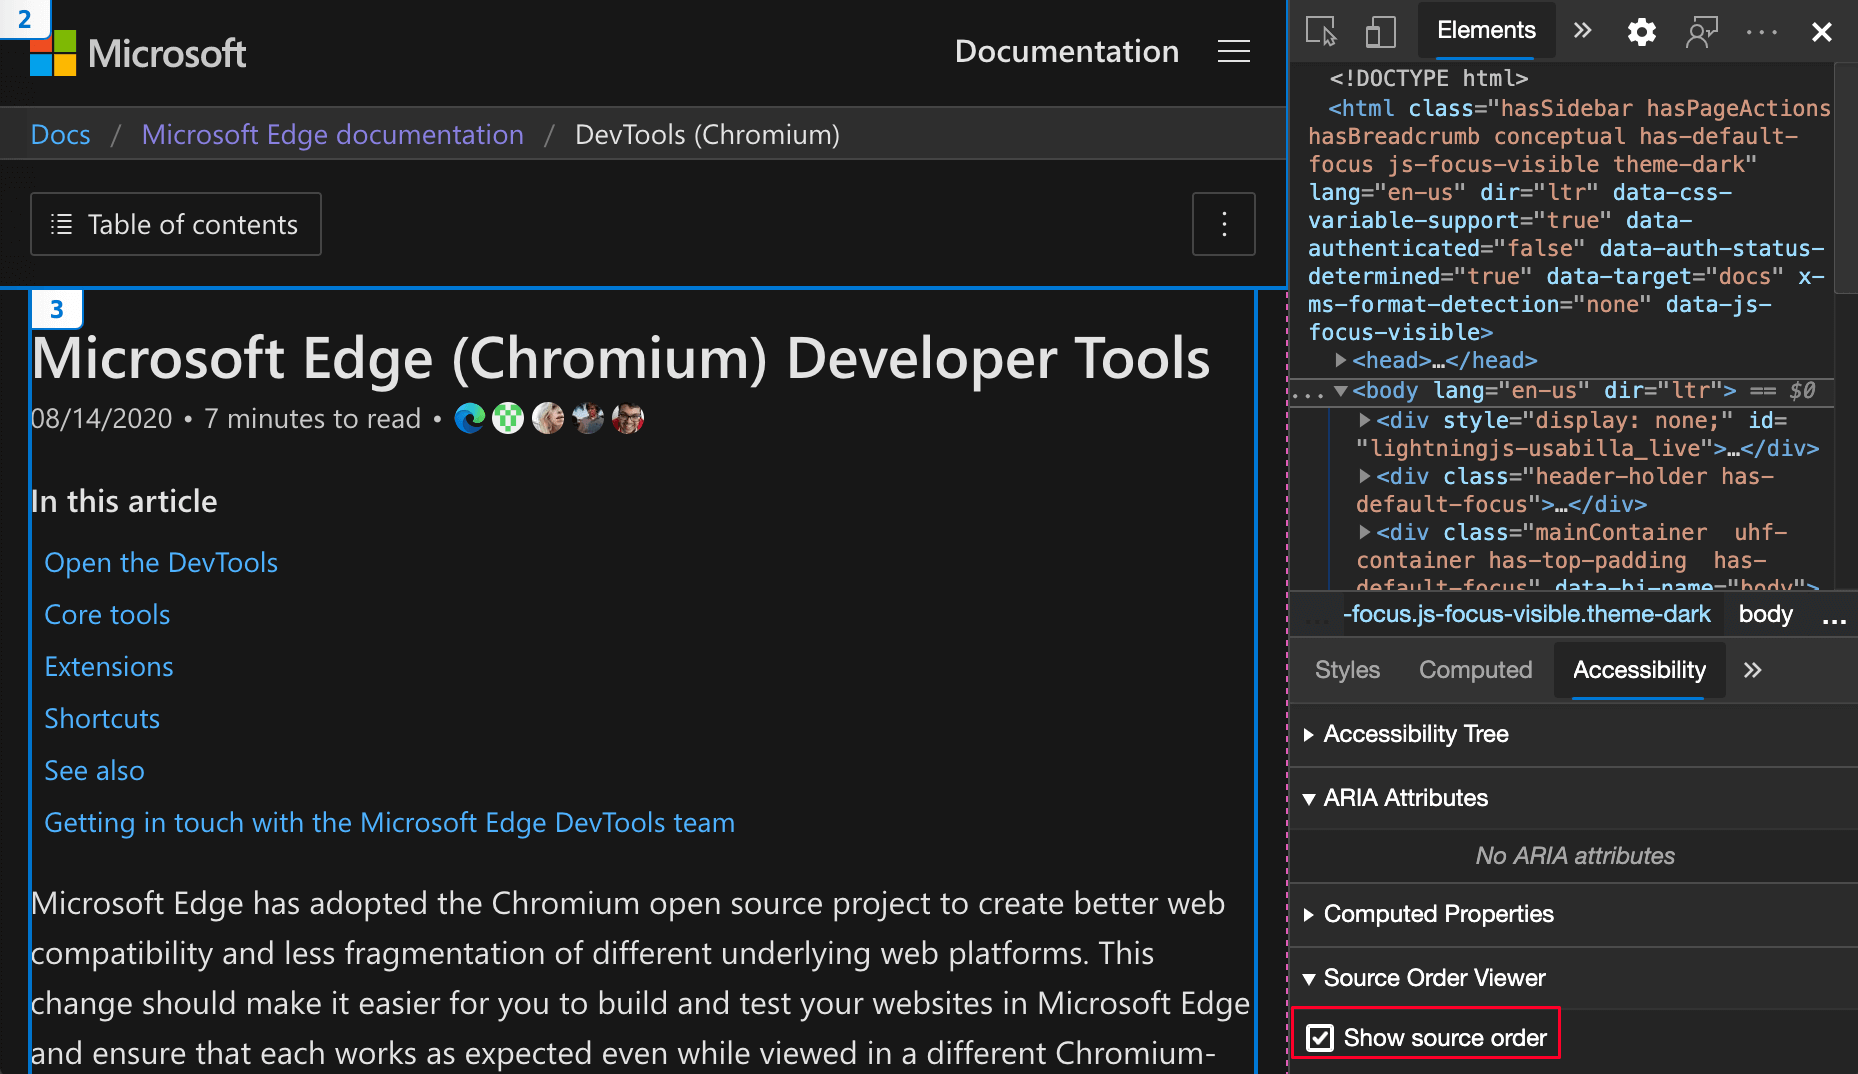 Source Order Viewer in the Accessibility pane